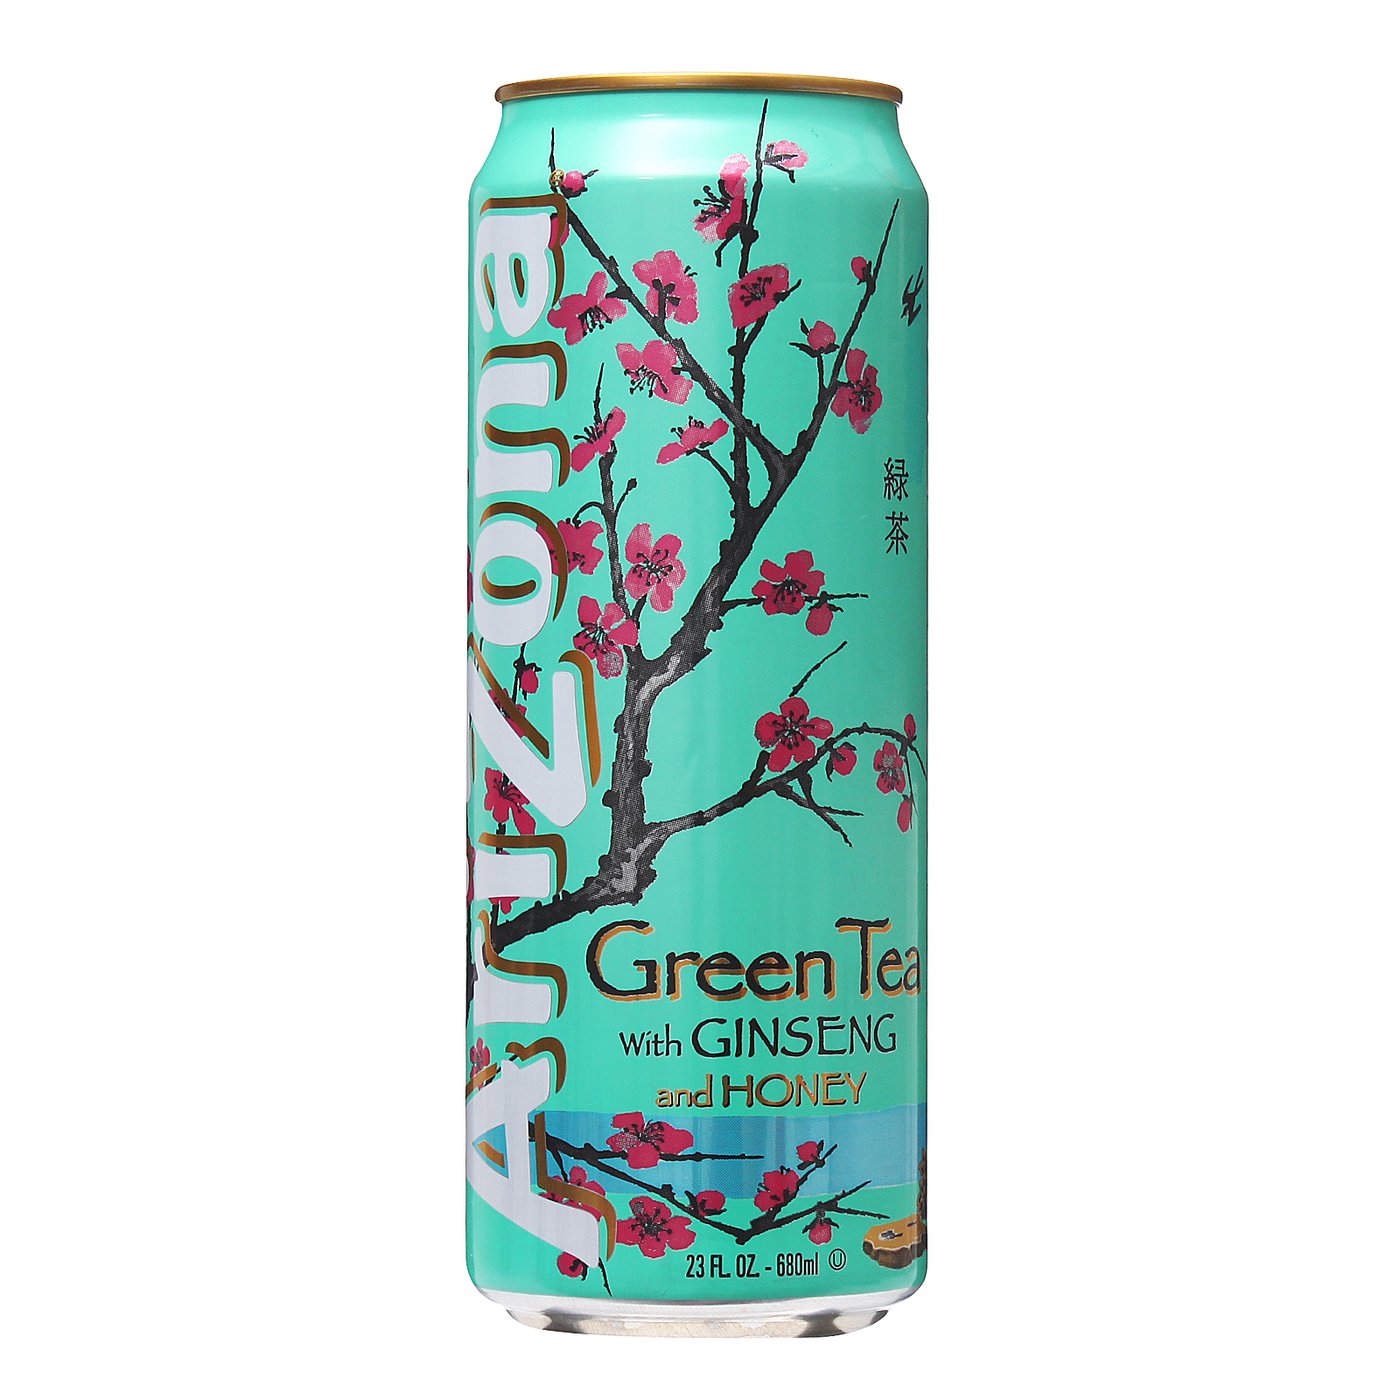 lawsuit says arizona iced tea with ginseng includes no